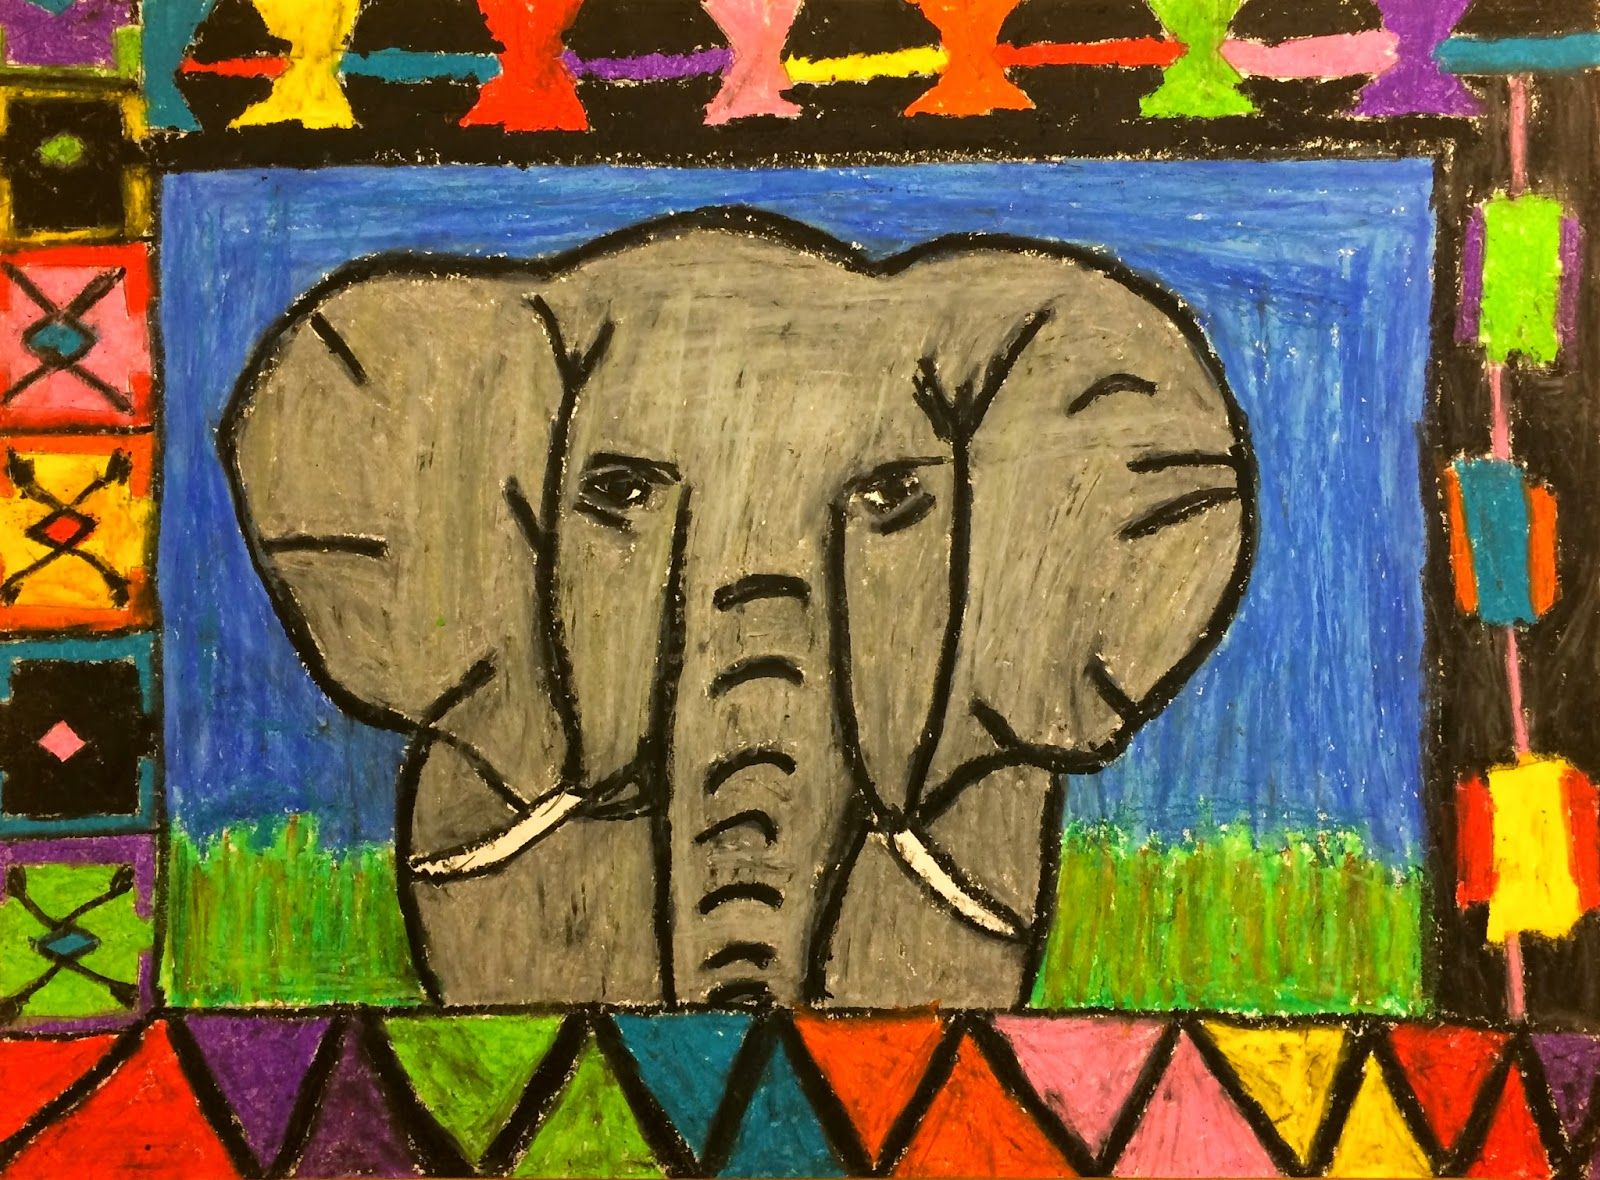 5Th Grade African Animals | African Art Projects, Elementary